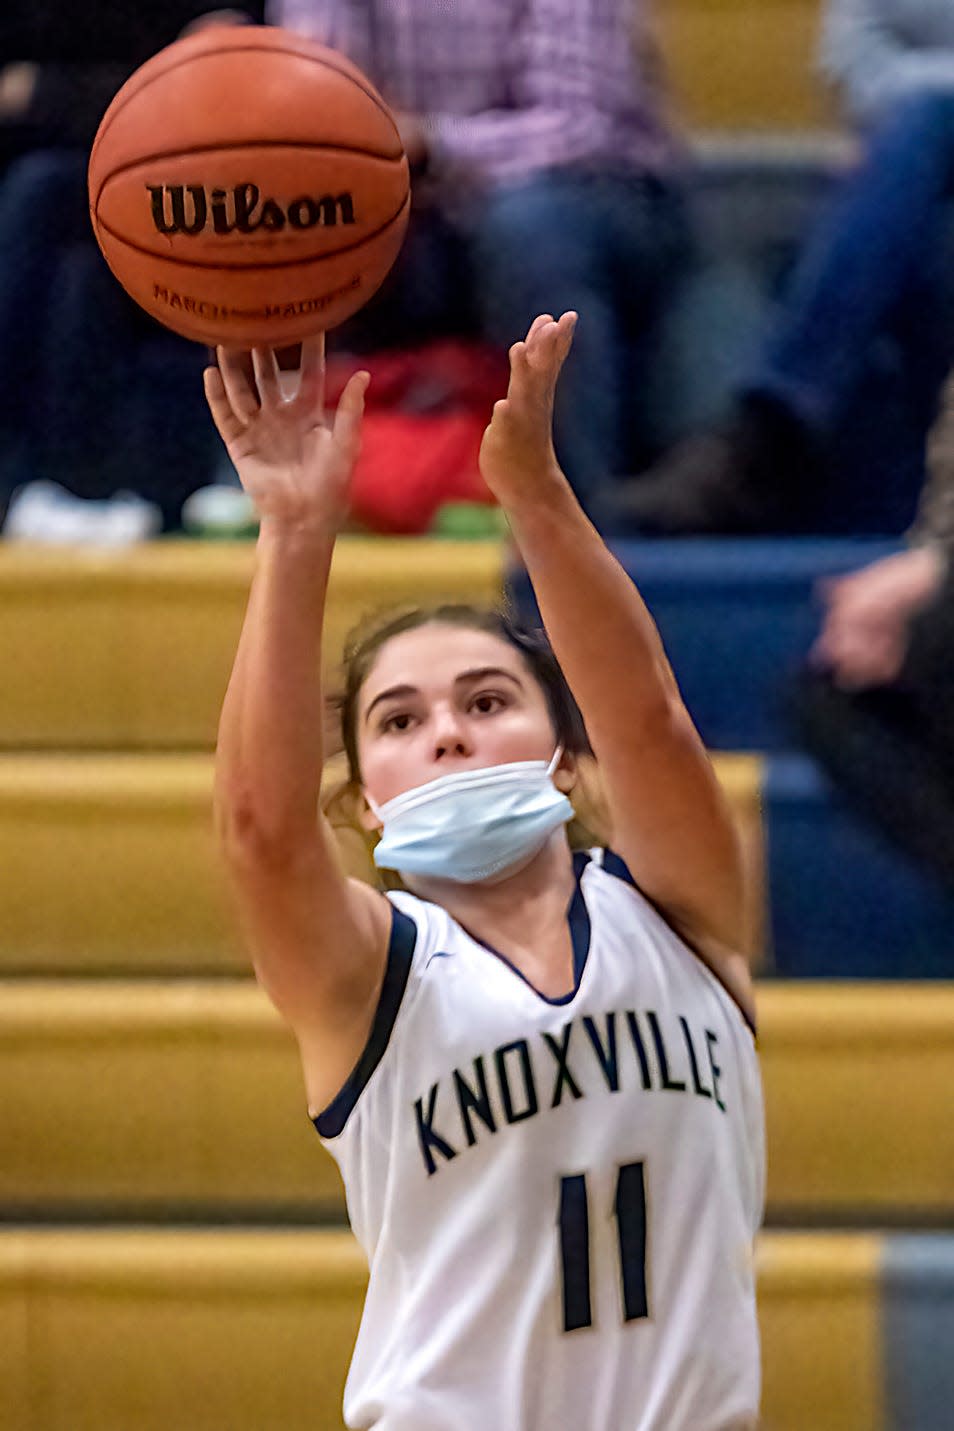 Knoxville senior Kynlee Stearns shoots and scores on a three-pointer during the Blue Bullets' 61-46 win over Bushnell-Prairie City on Thursday, Dec. 2, 2021.